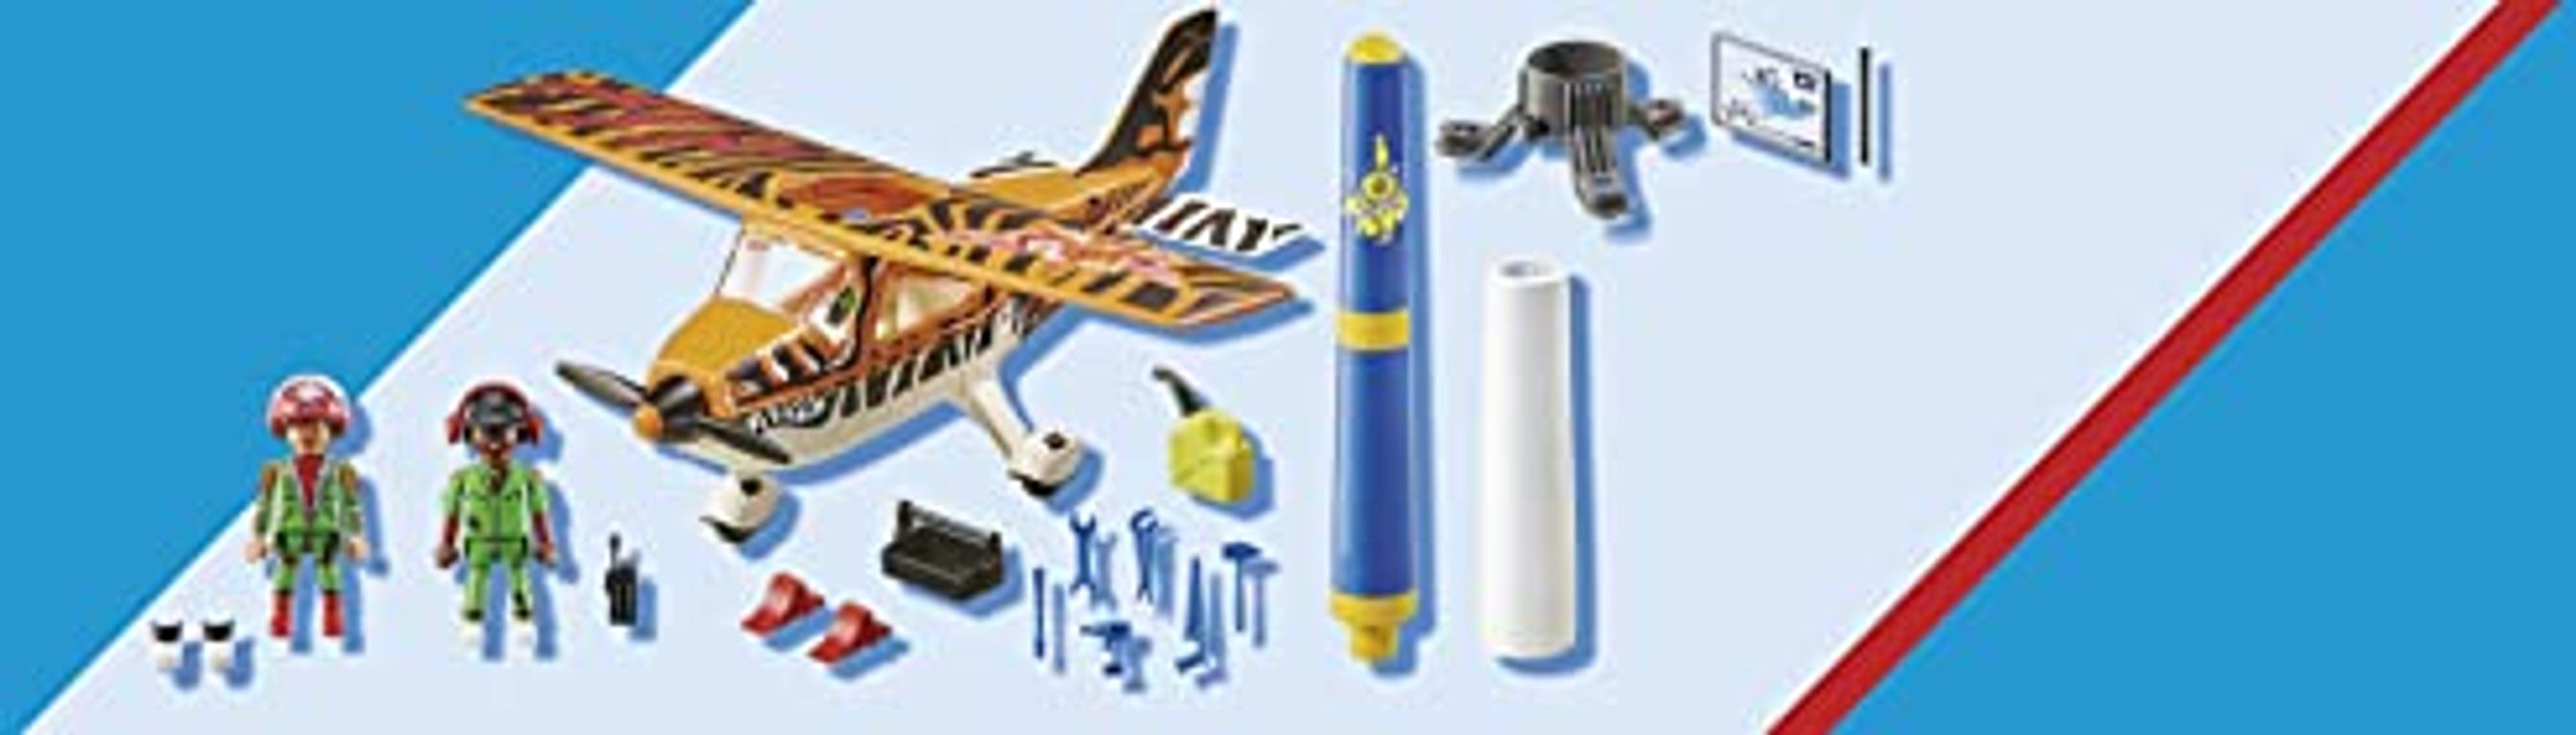 Playmobil® Stunt Show Air Stunt Show Tiger Propeller Plane components